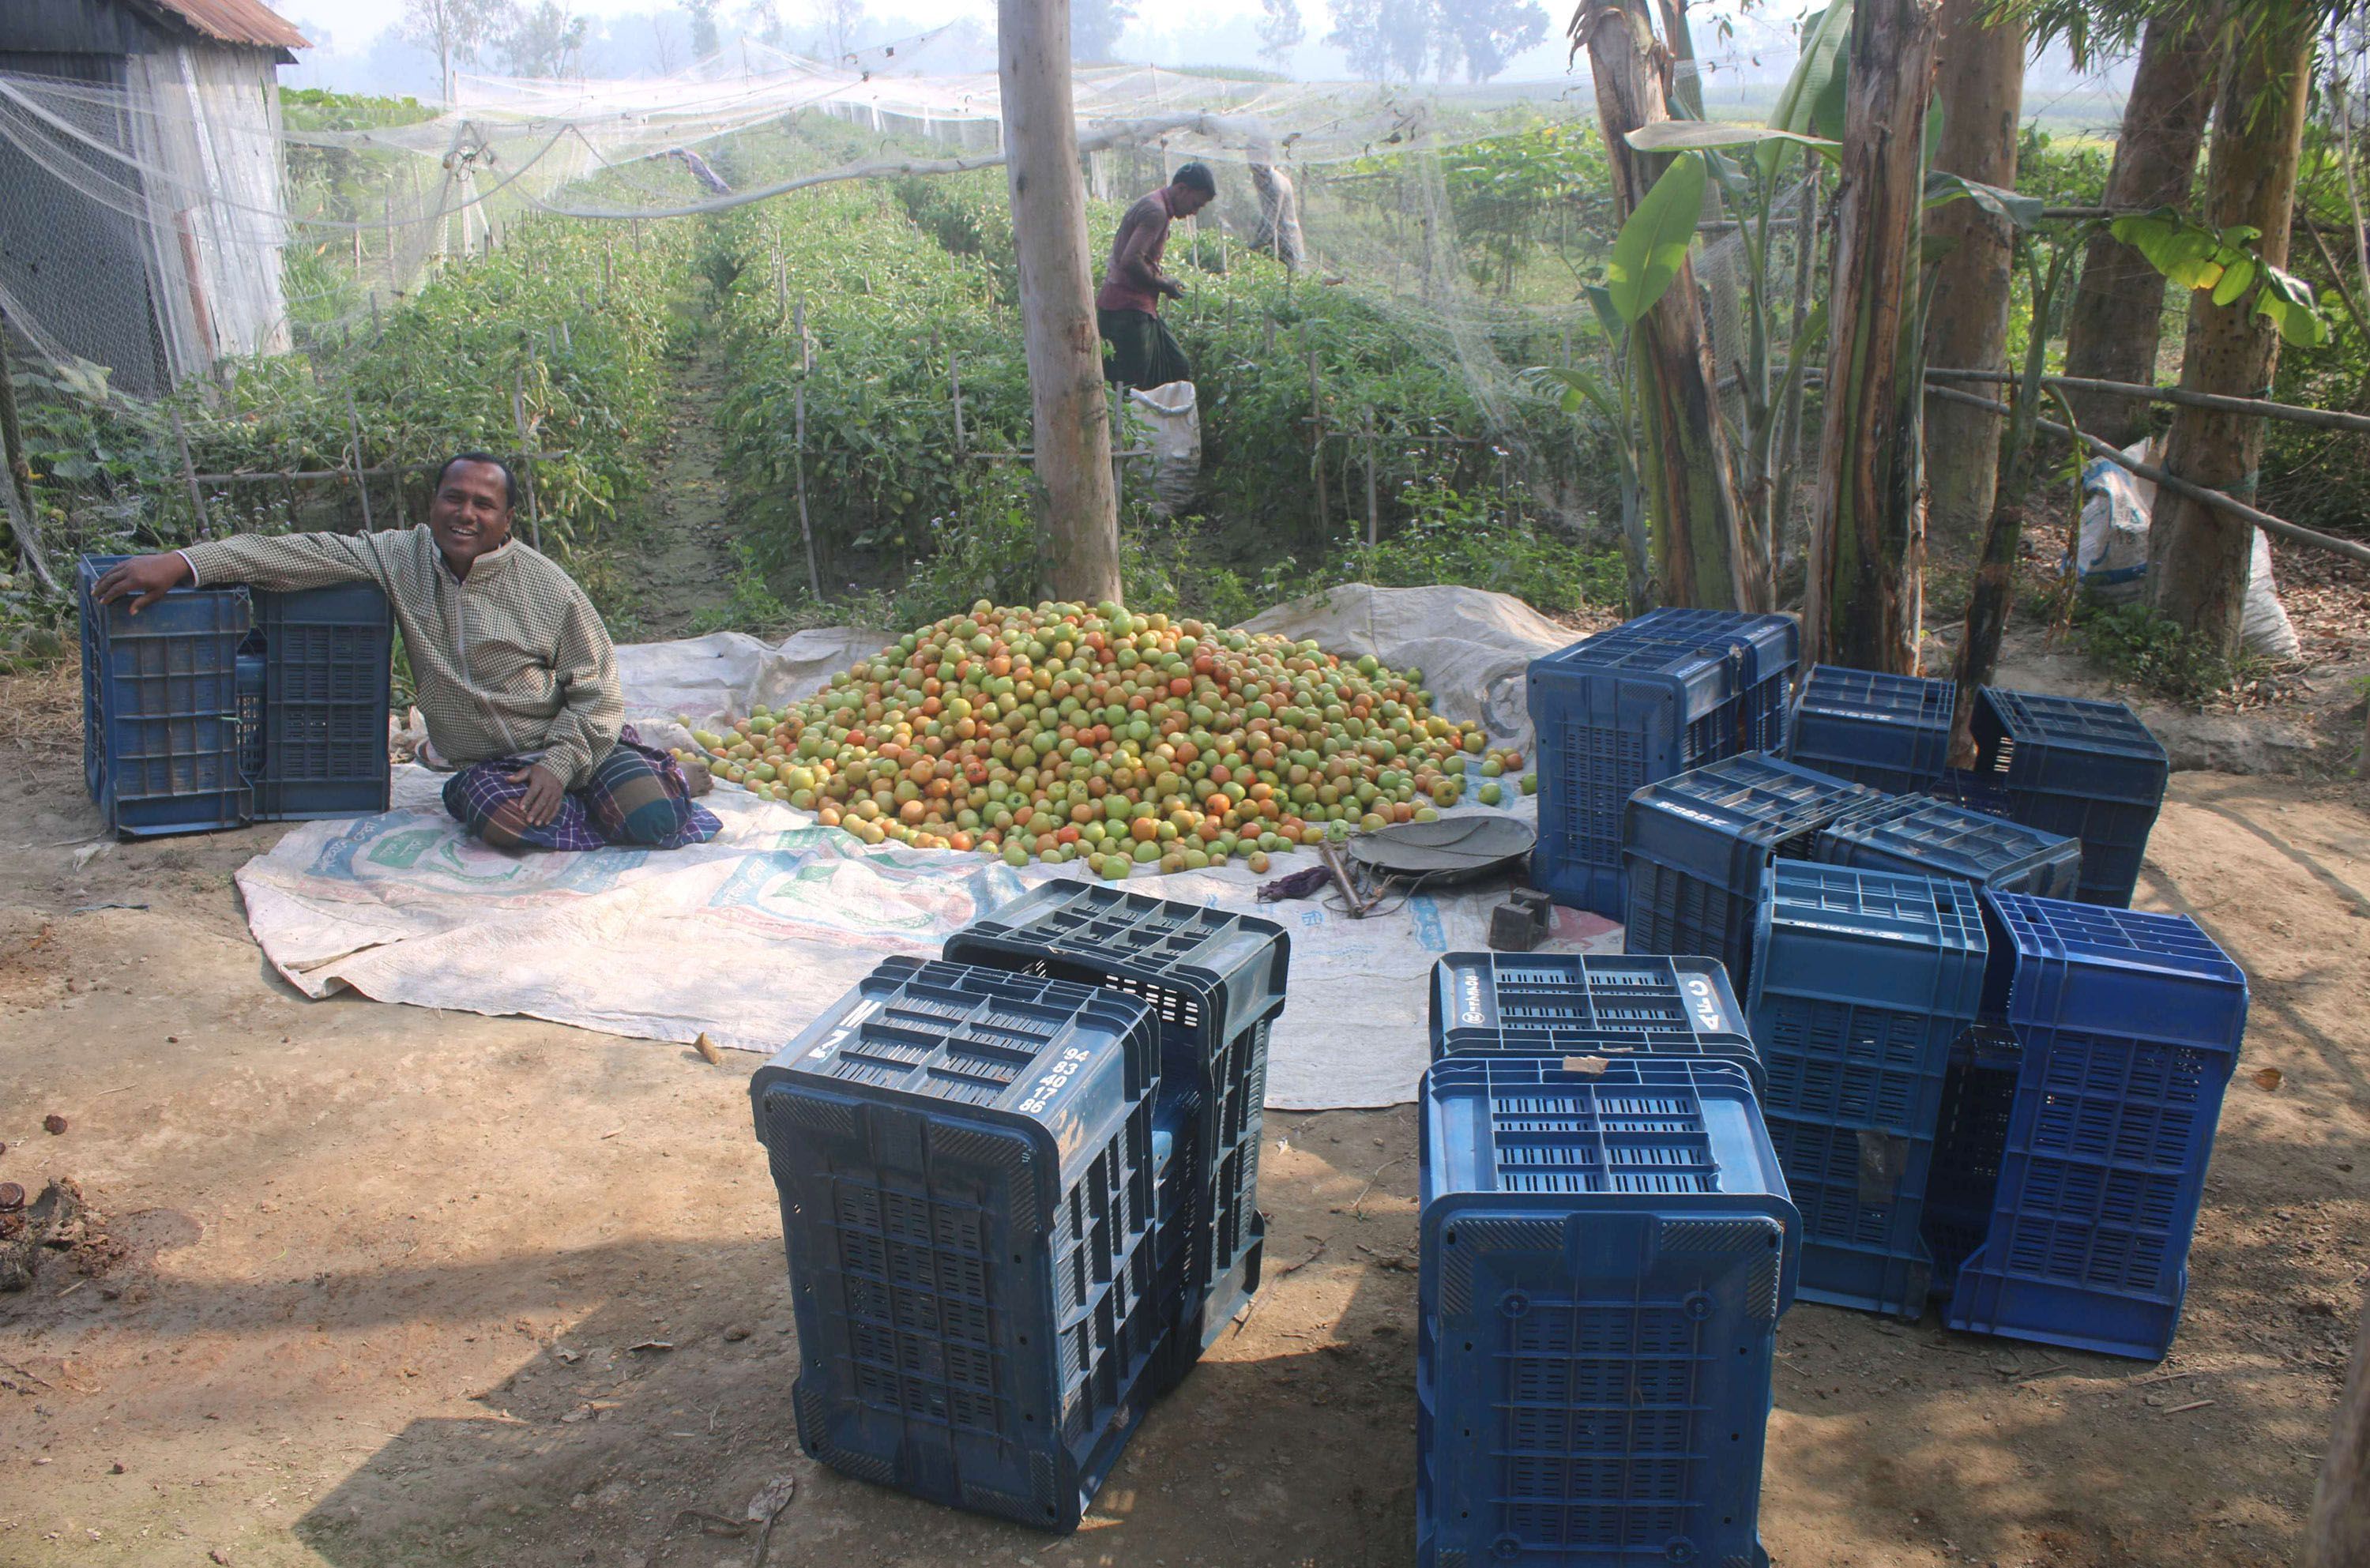 However, there is some problem in ripening tomatoes. It is necessary to collect ripe raw tomatoes from the tree and cover them in piles for 2-1 days, otherwise good color does not come. However, the farmers think that it will be possible to increase the production if the government gets any facility.